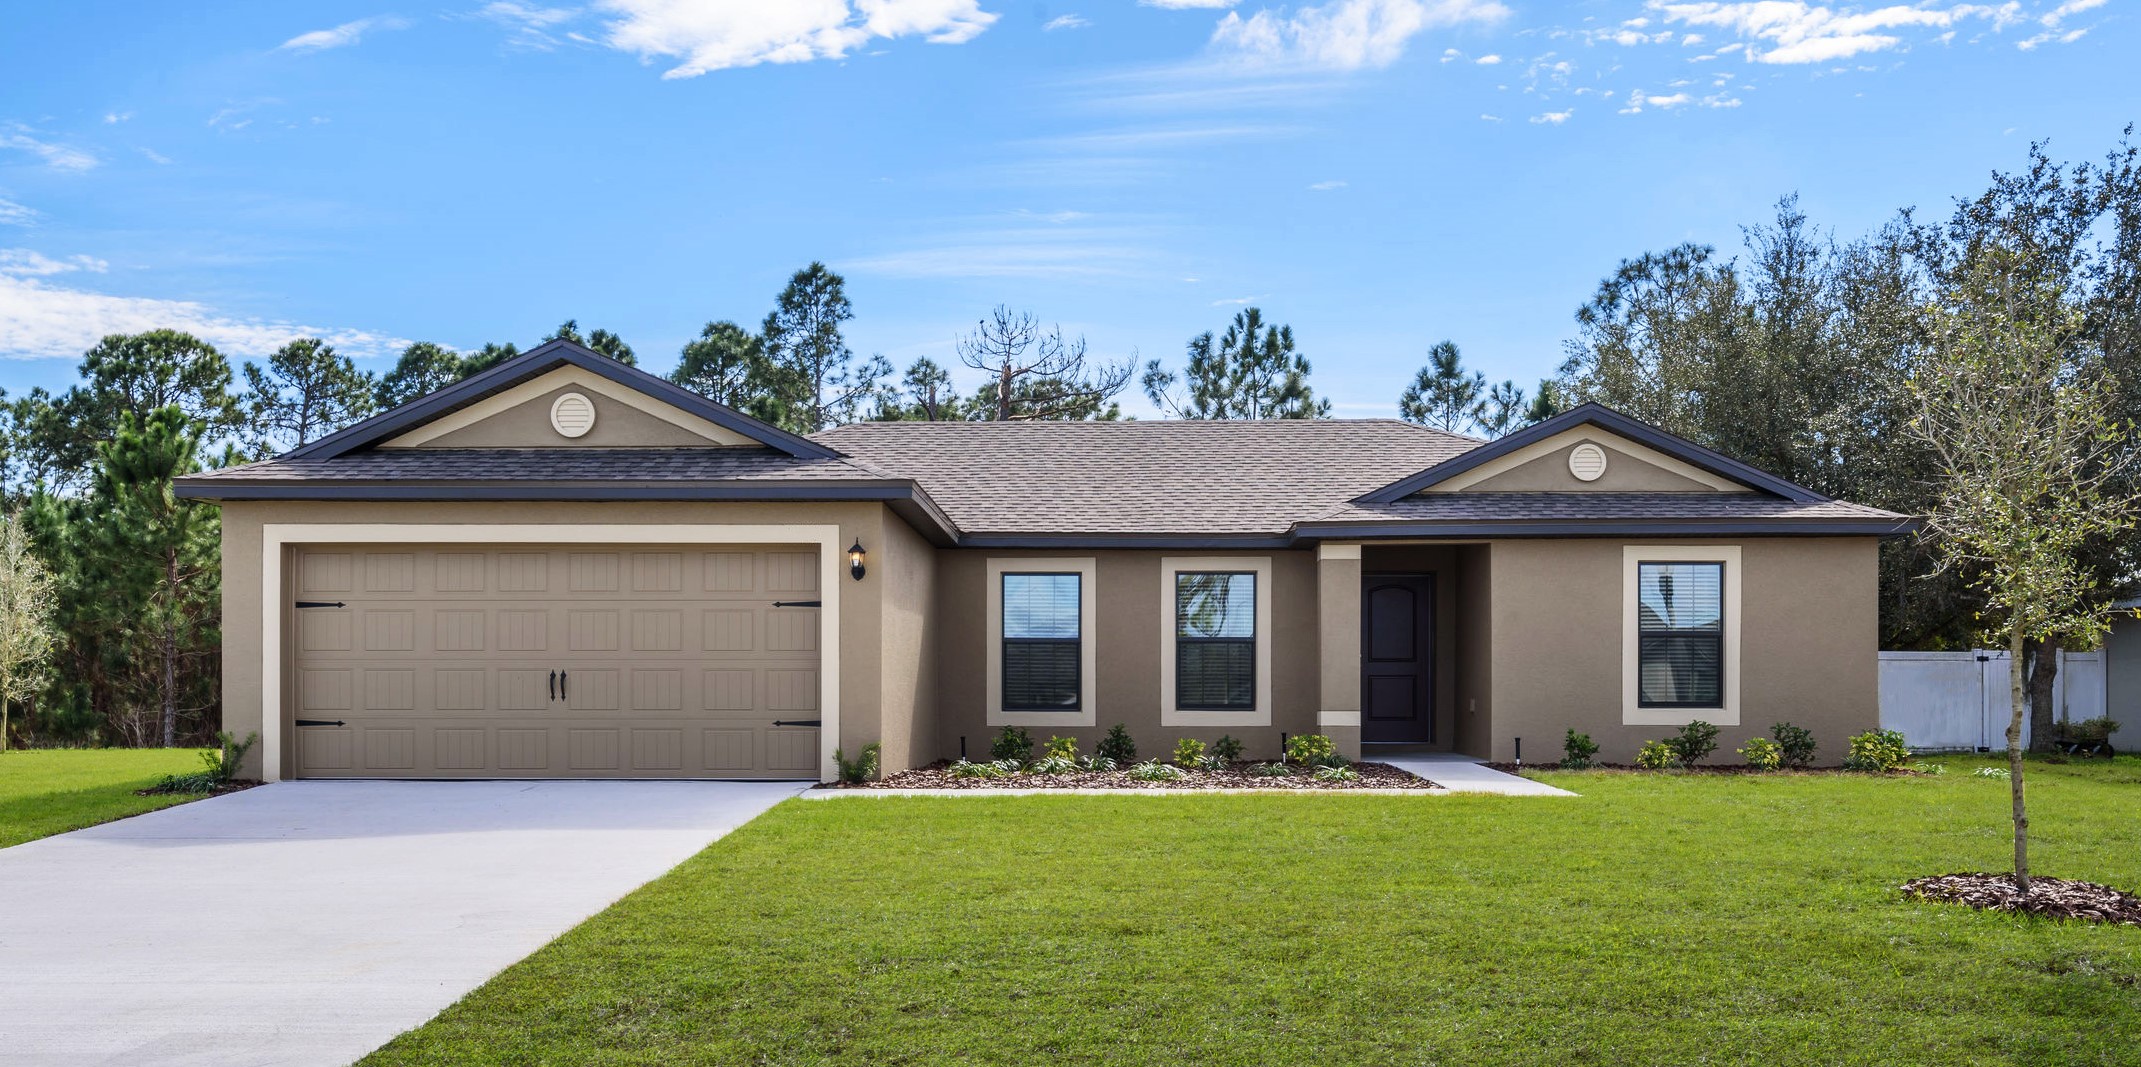 The Caladesi by LGI Homes will be available at the Palm Coast Grand Opening on Dec. 7, 2019.